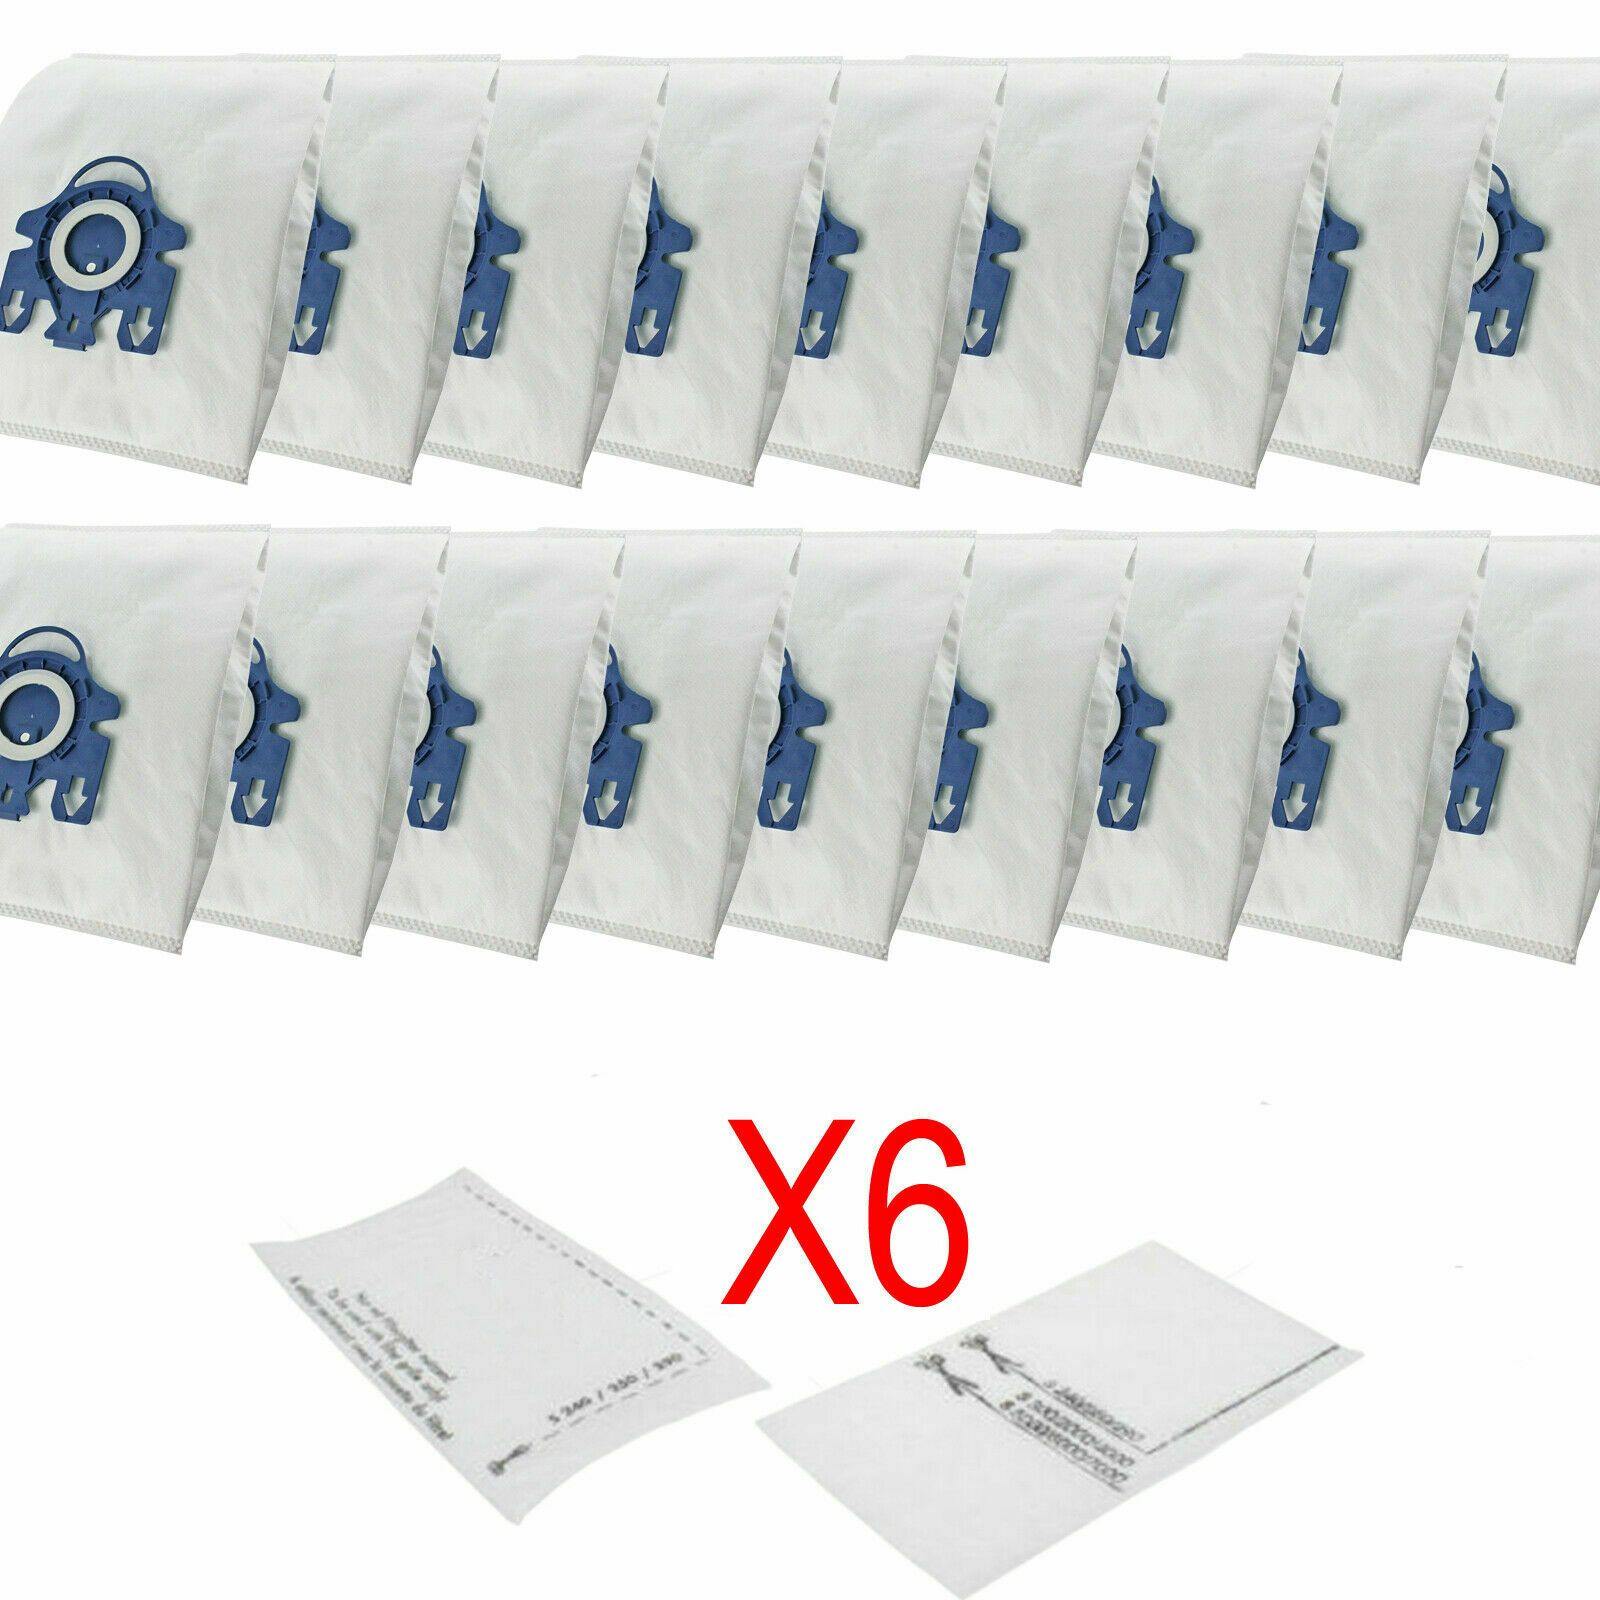 18 Vacuum Cleaner Dust Bag + 12 Filter For Miele S400i-S456i S600-S658 S800-S858 Sparesbarn